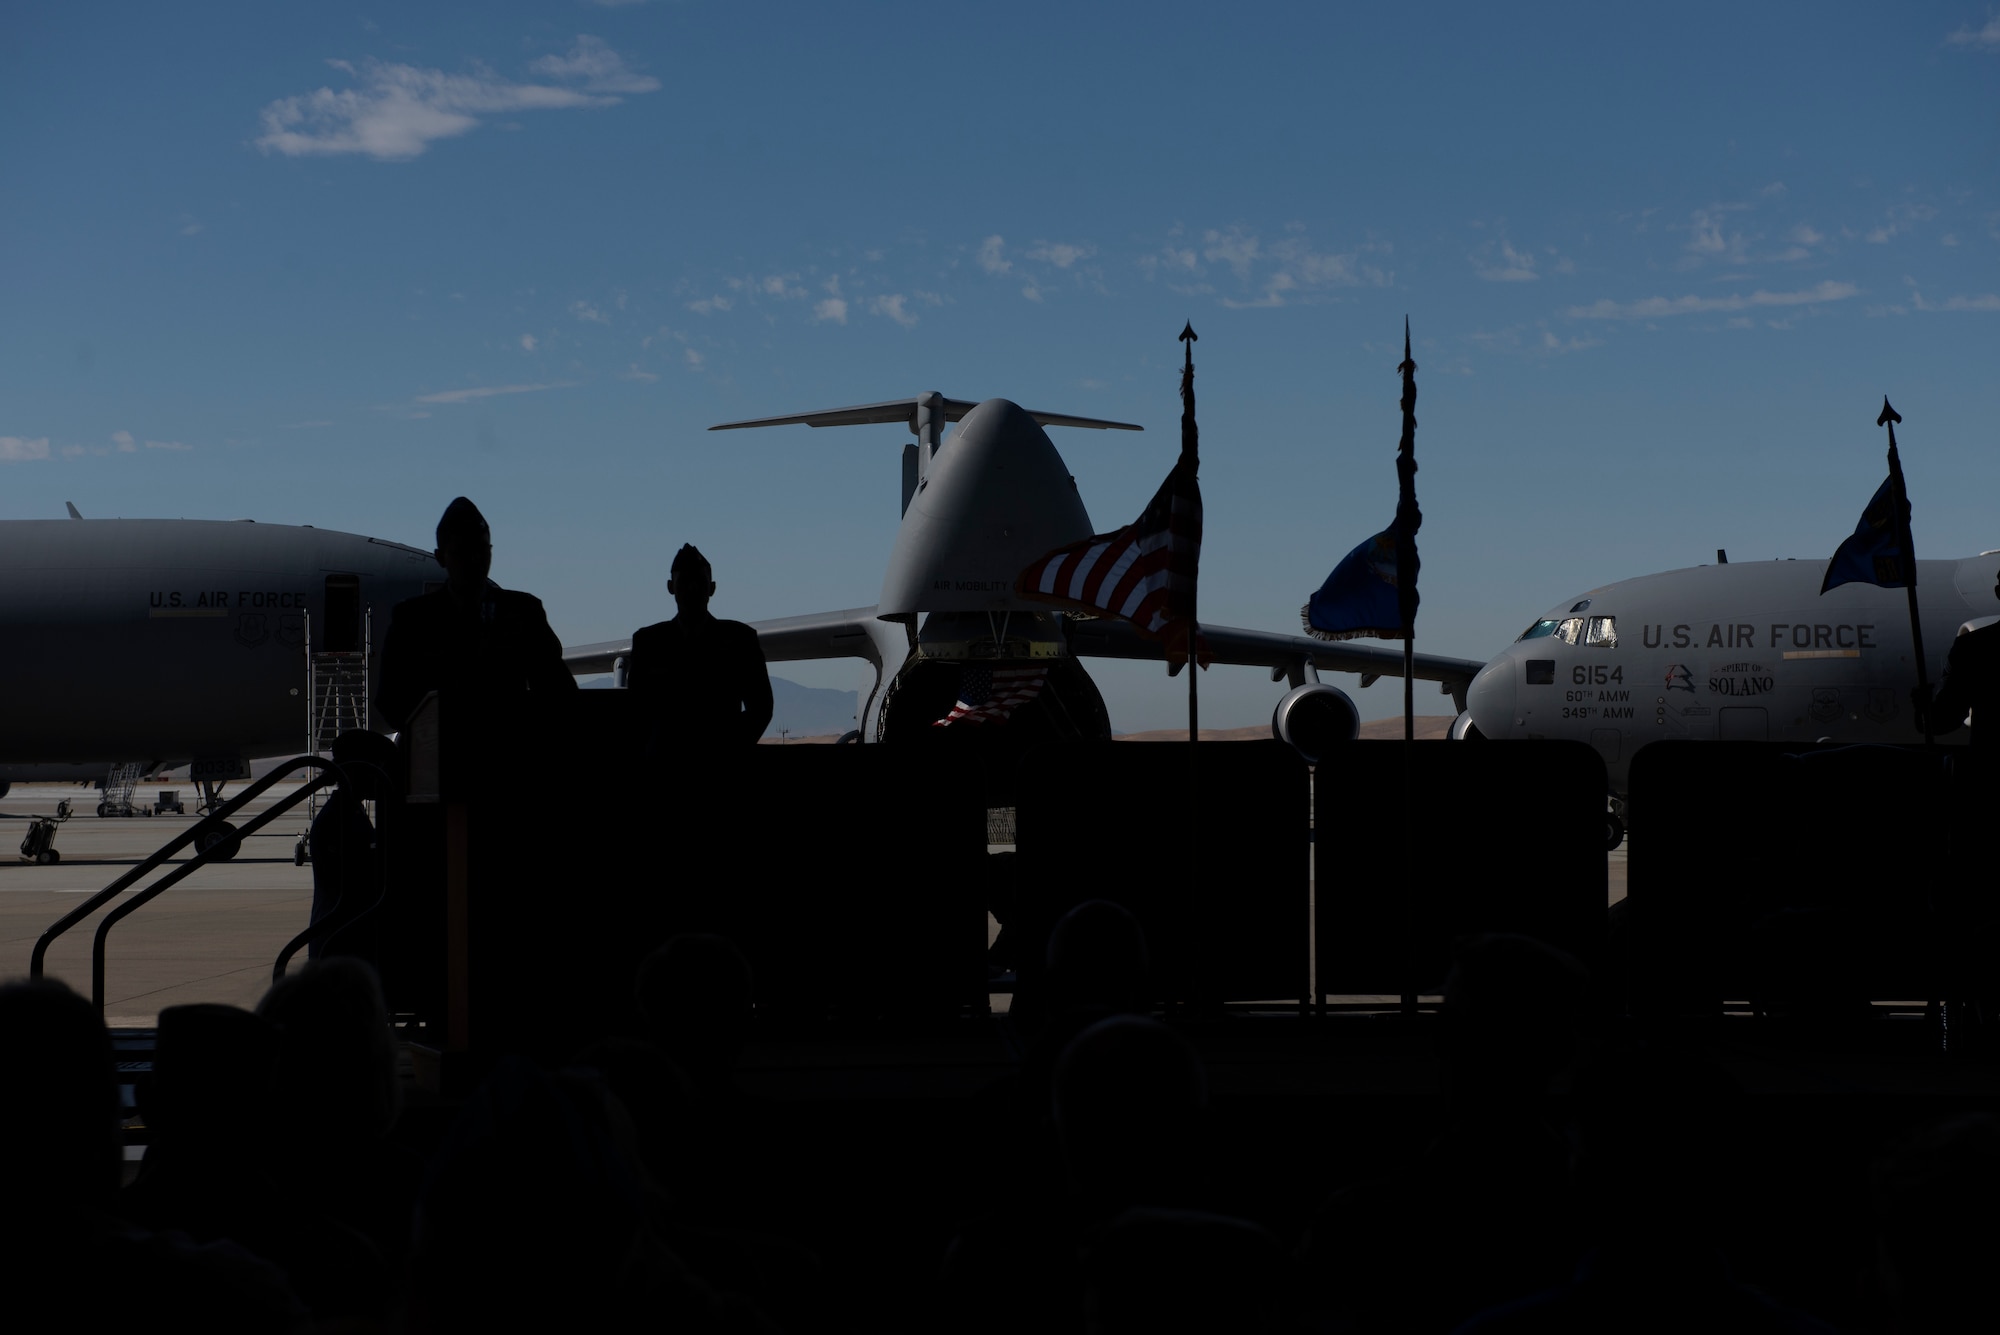 U.S. Air Force Col. Jeff Nelson, 60th Air Mobility Wing commander, delivers remarks July 26, 2019, during the 60th Operations Group change of command ceremony at Travis Air Force Base, California. During the ceremony, Col. Theresa Weems, outgoing 60th OG commander, transferred command to Col. Gregg Johnson. (U.S. Air Force photo by Tech. Sgt. James Hodgman)